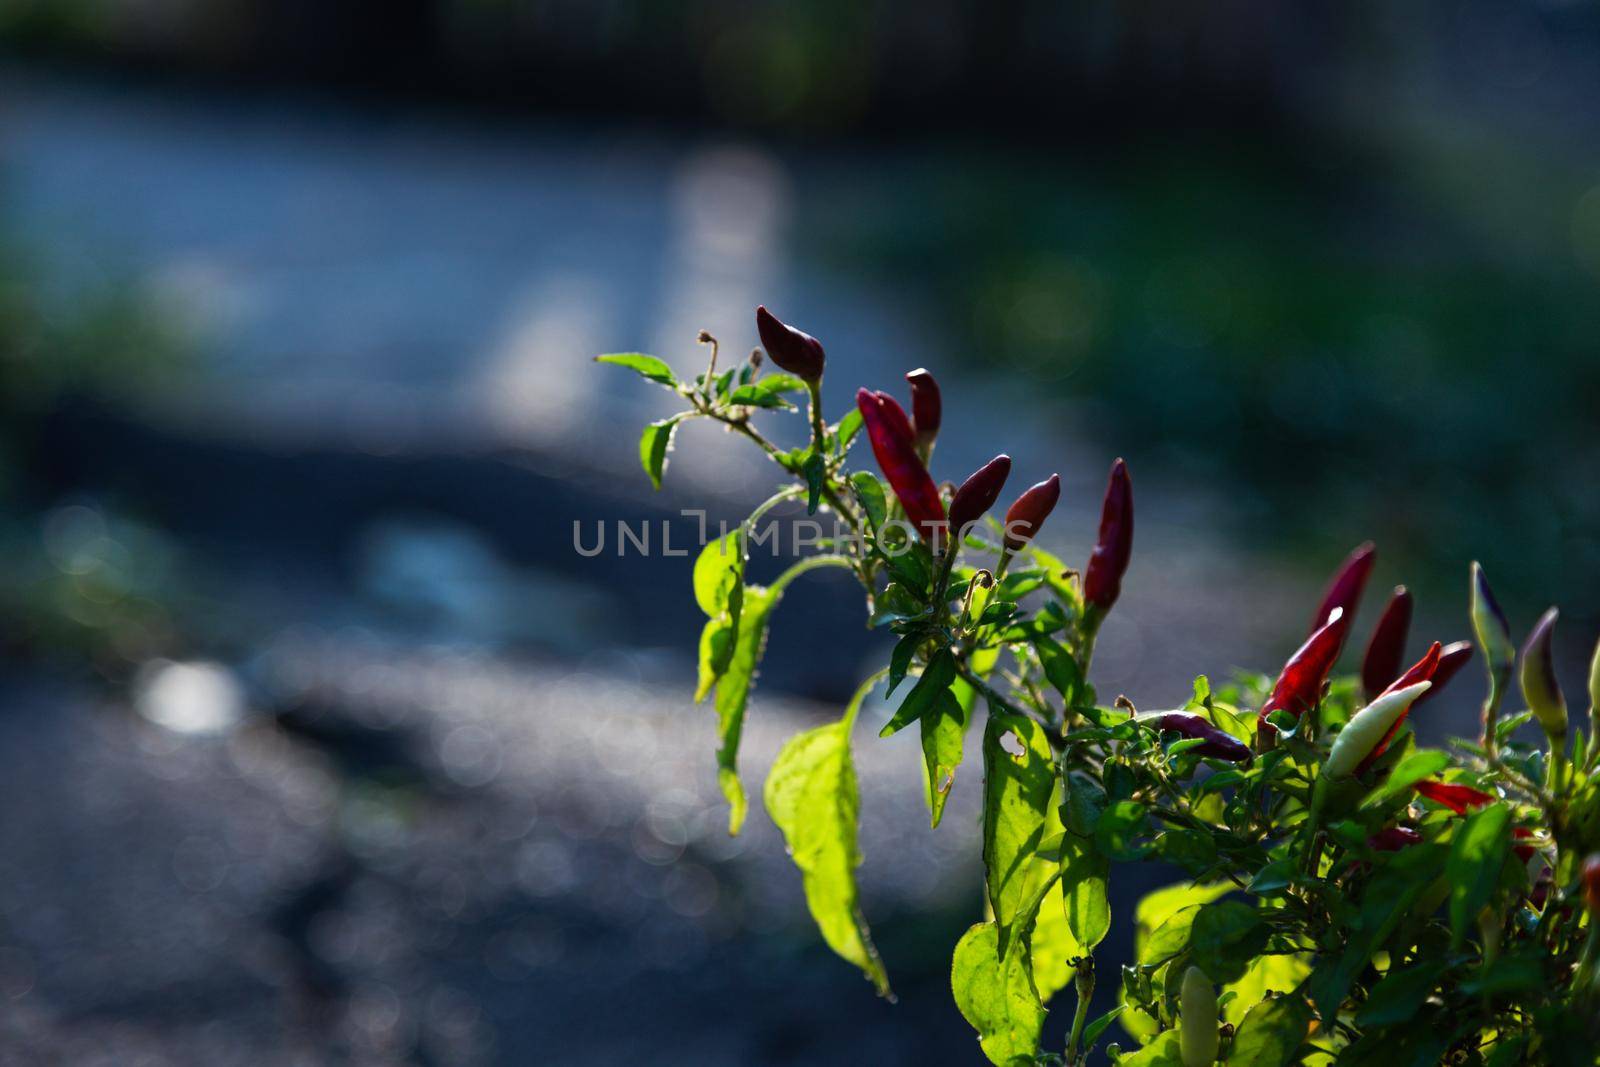 Bright colored pepper plants - hot chilly peppers in soft focus. Little red hot Hawaiian Chile Peppers on a branch, closeup. by lunarts